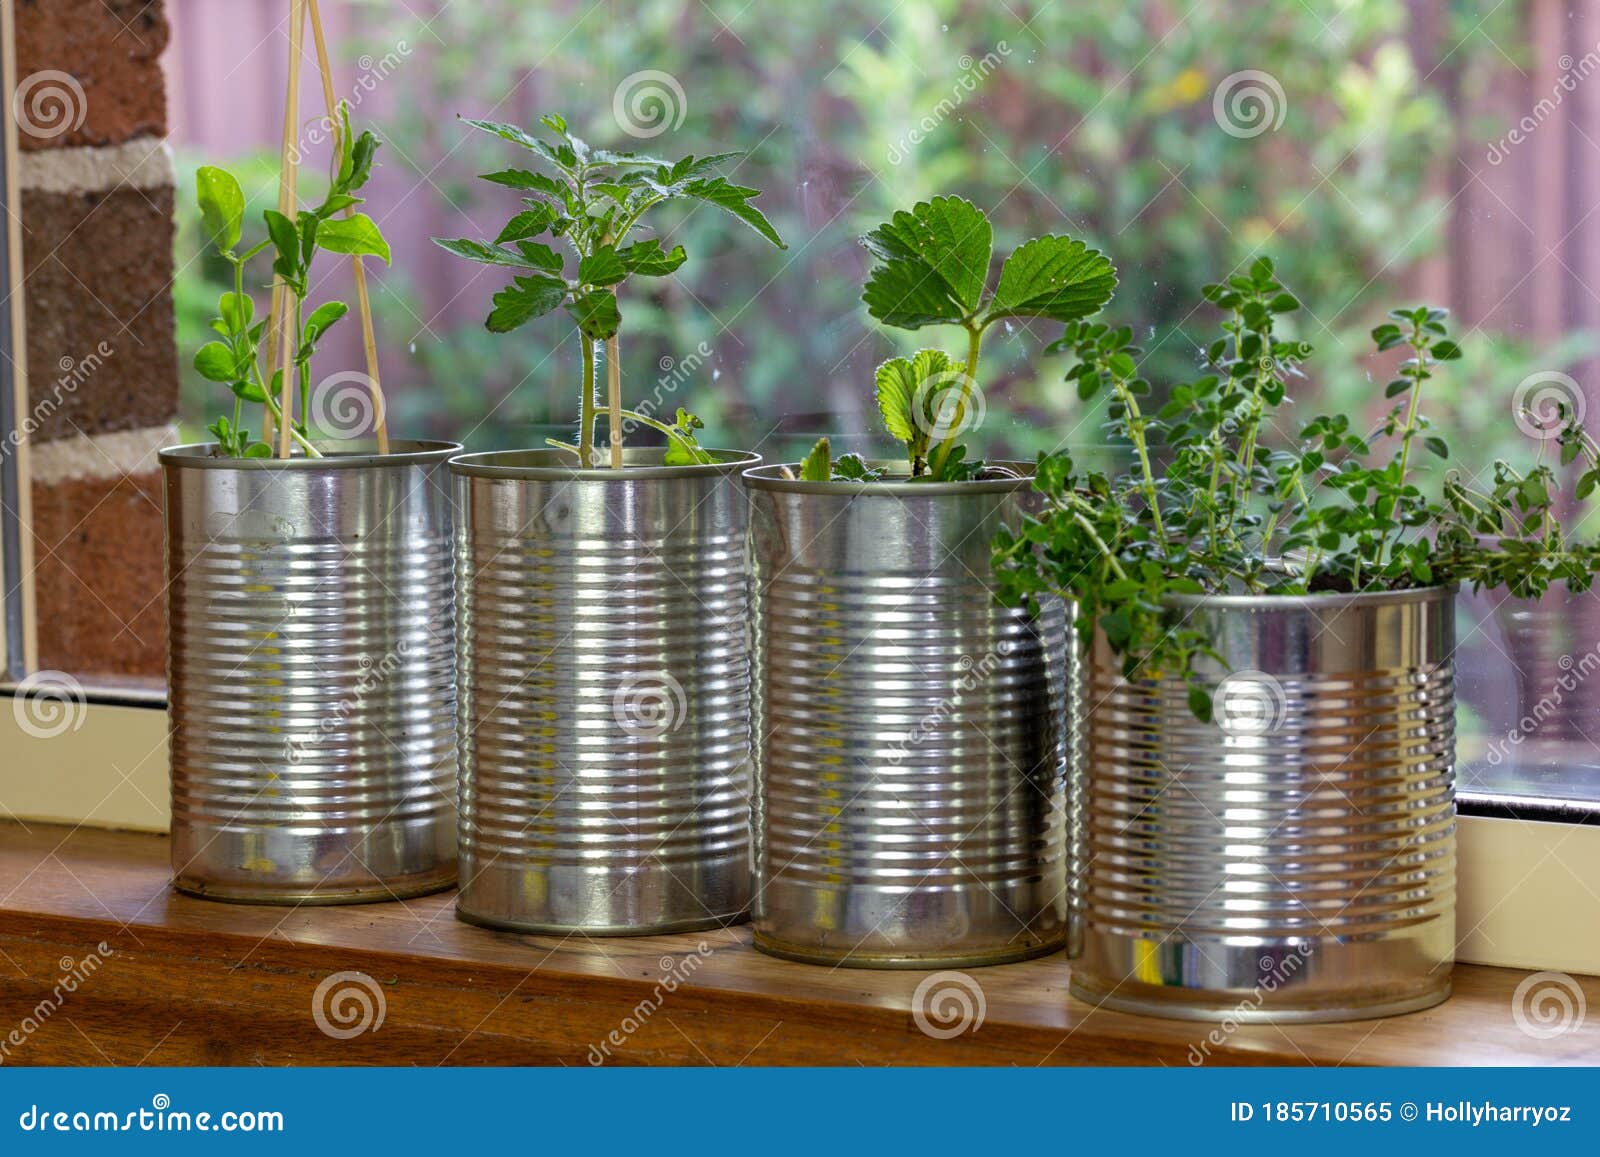 close up of seedlings growing in reuse tin cans and toilet roll